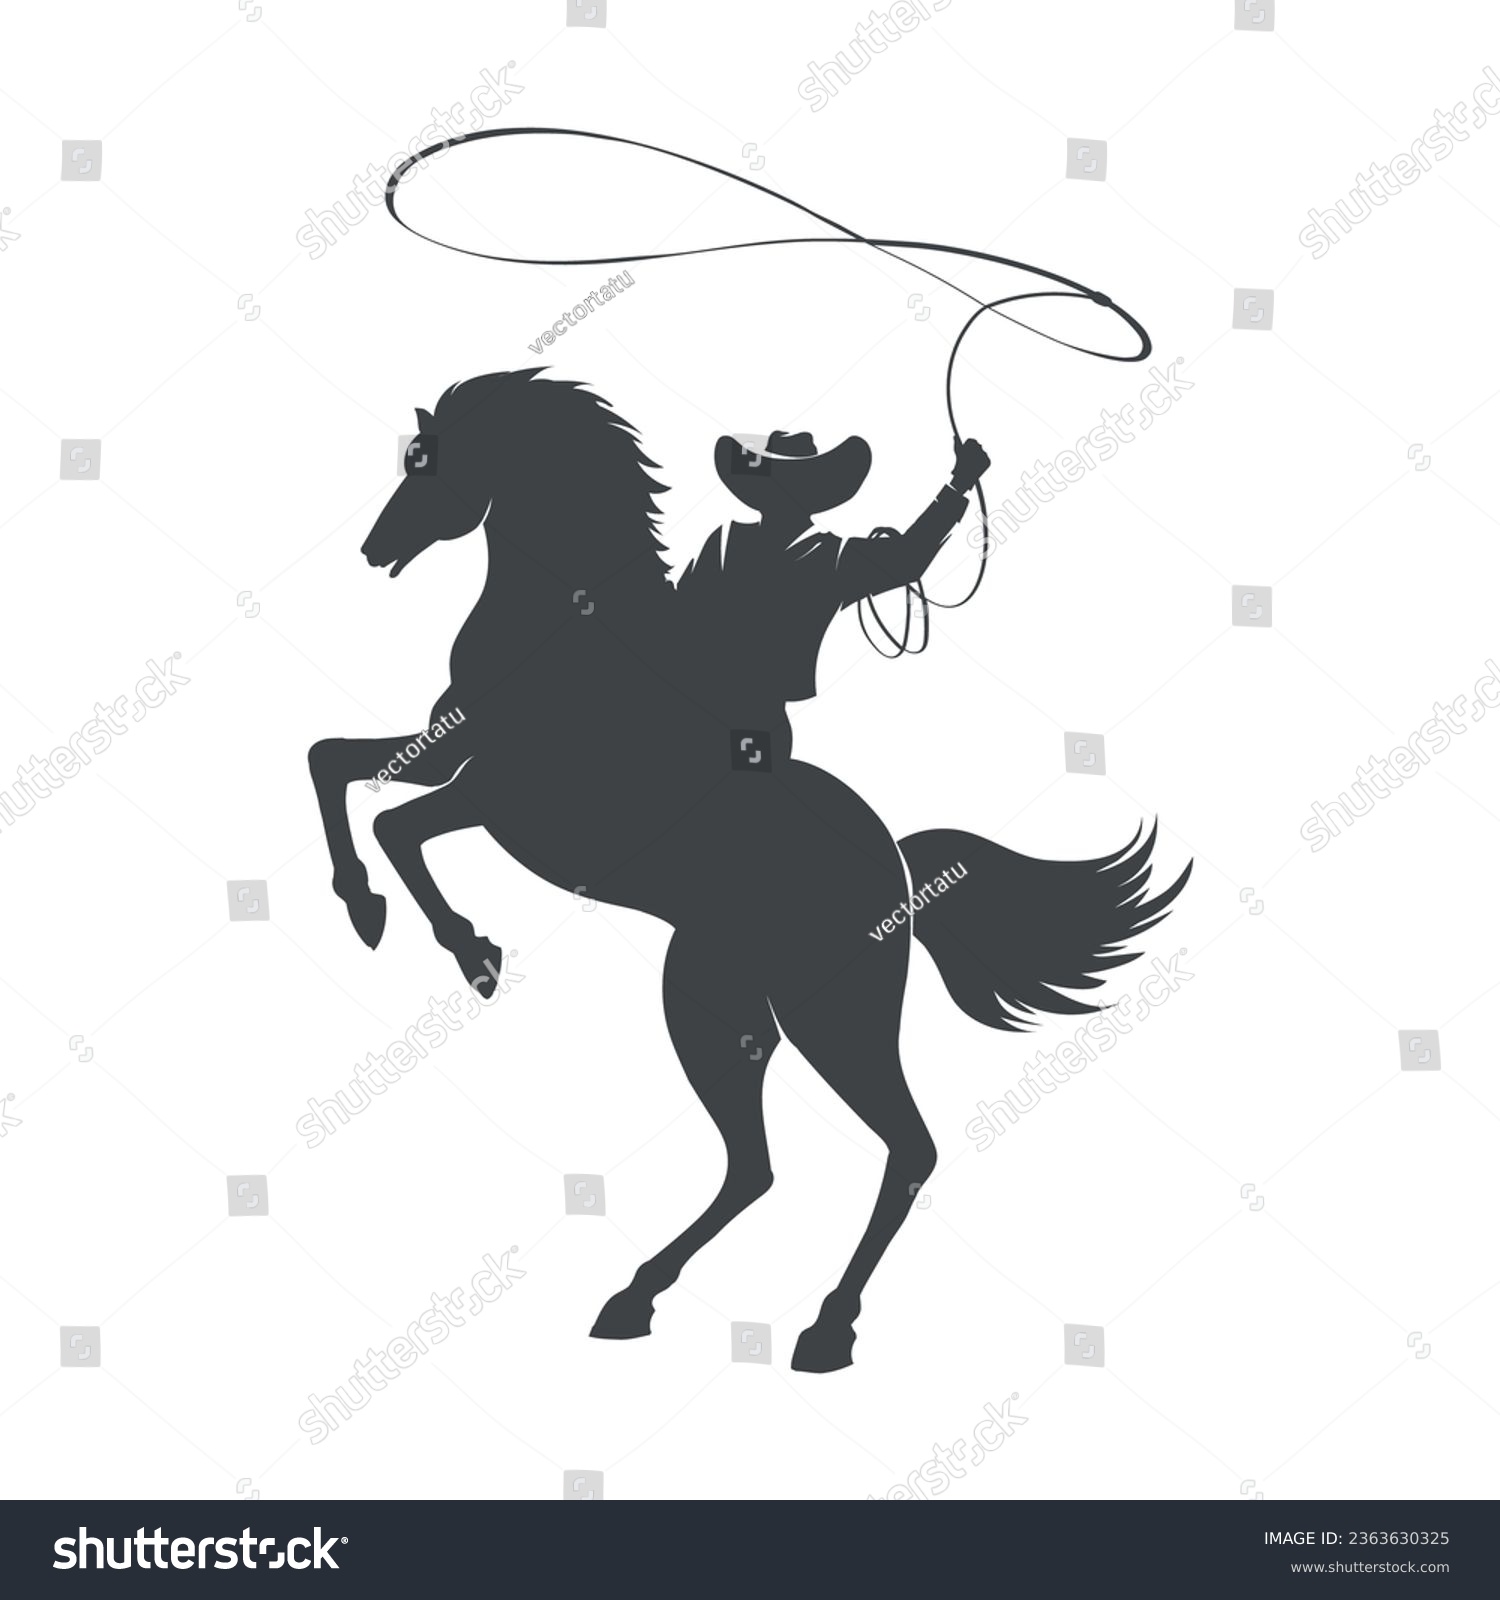 SVG of Monochrome cowboy with rope lasso on horse. Horseback cow-boy black silhouette element for country american texas rodeo western design isolated vector illustration svg